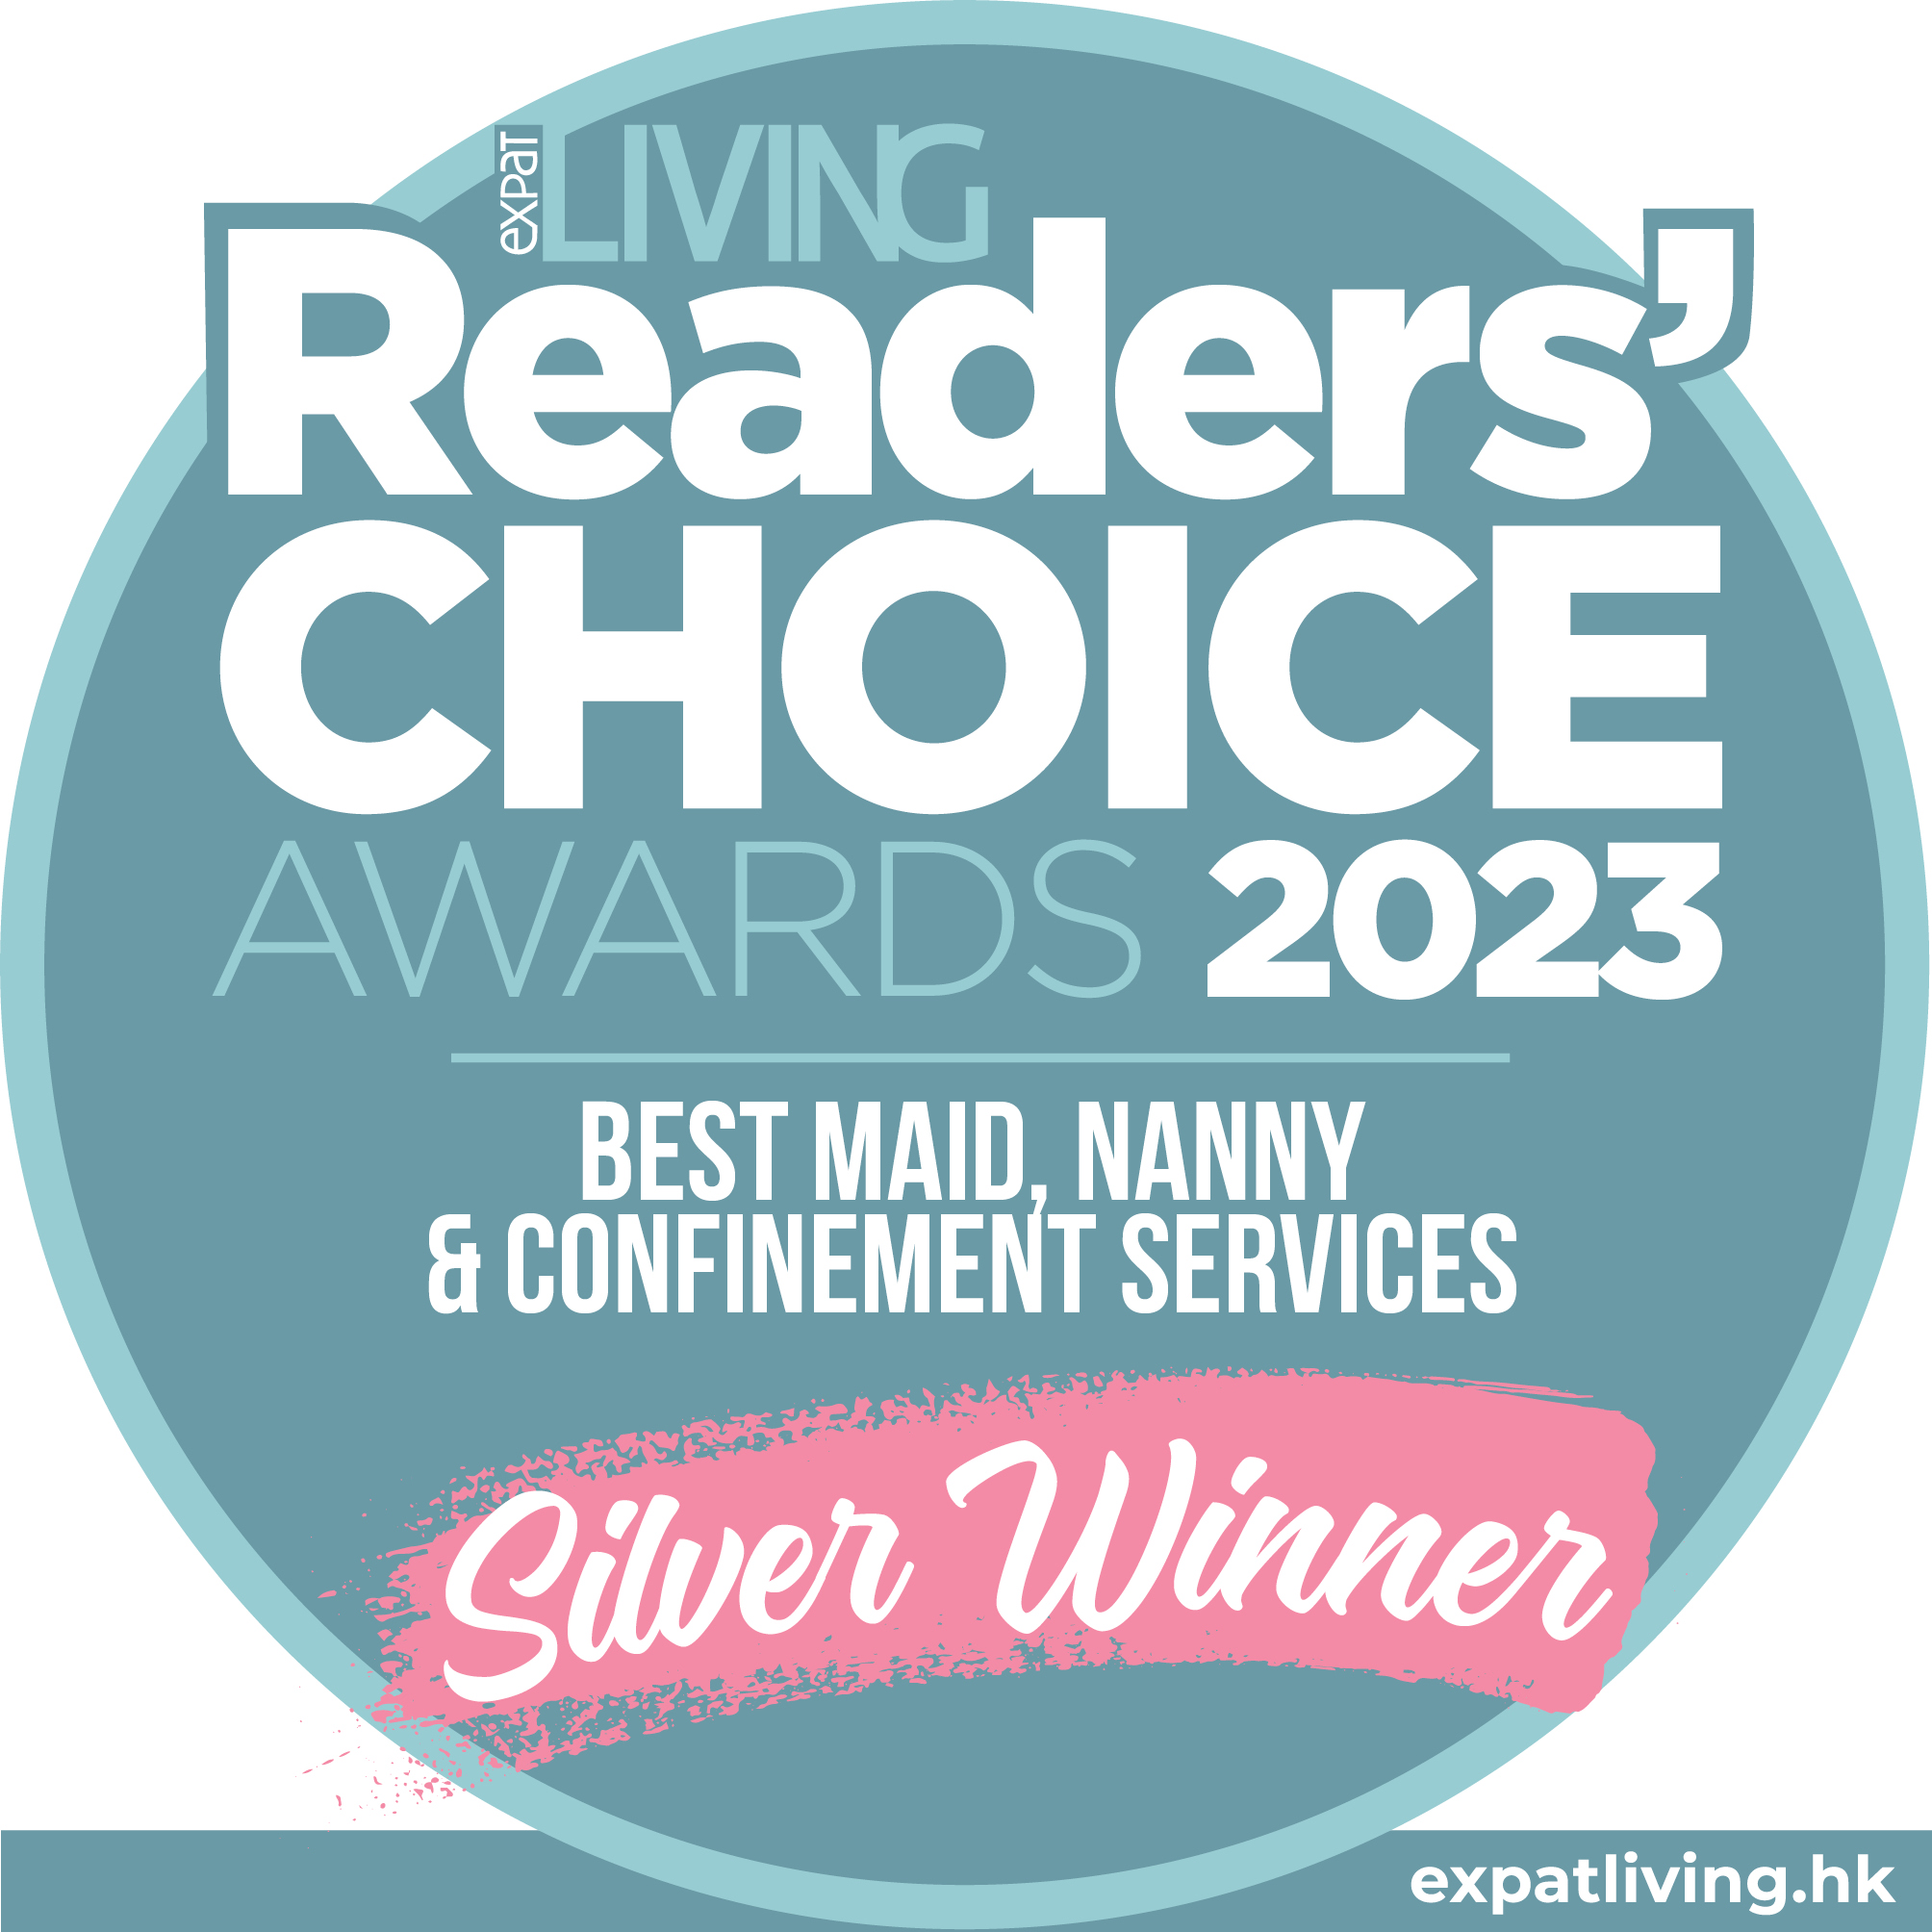 Silver winner of the Reader's Choice Awards 2023 for Best Maid, Nanny & Confinement Services